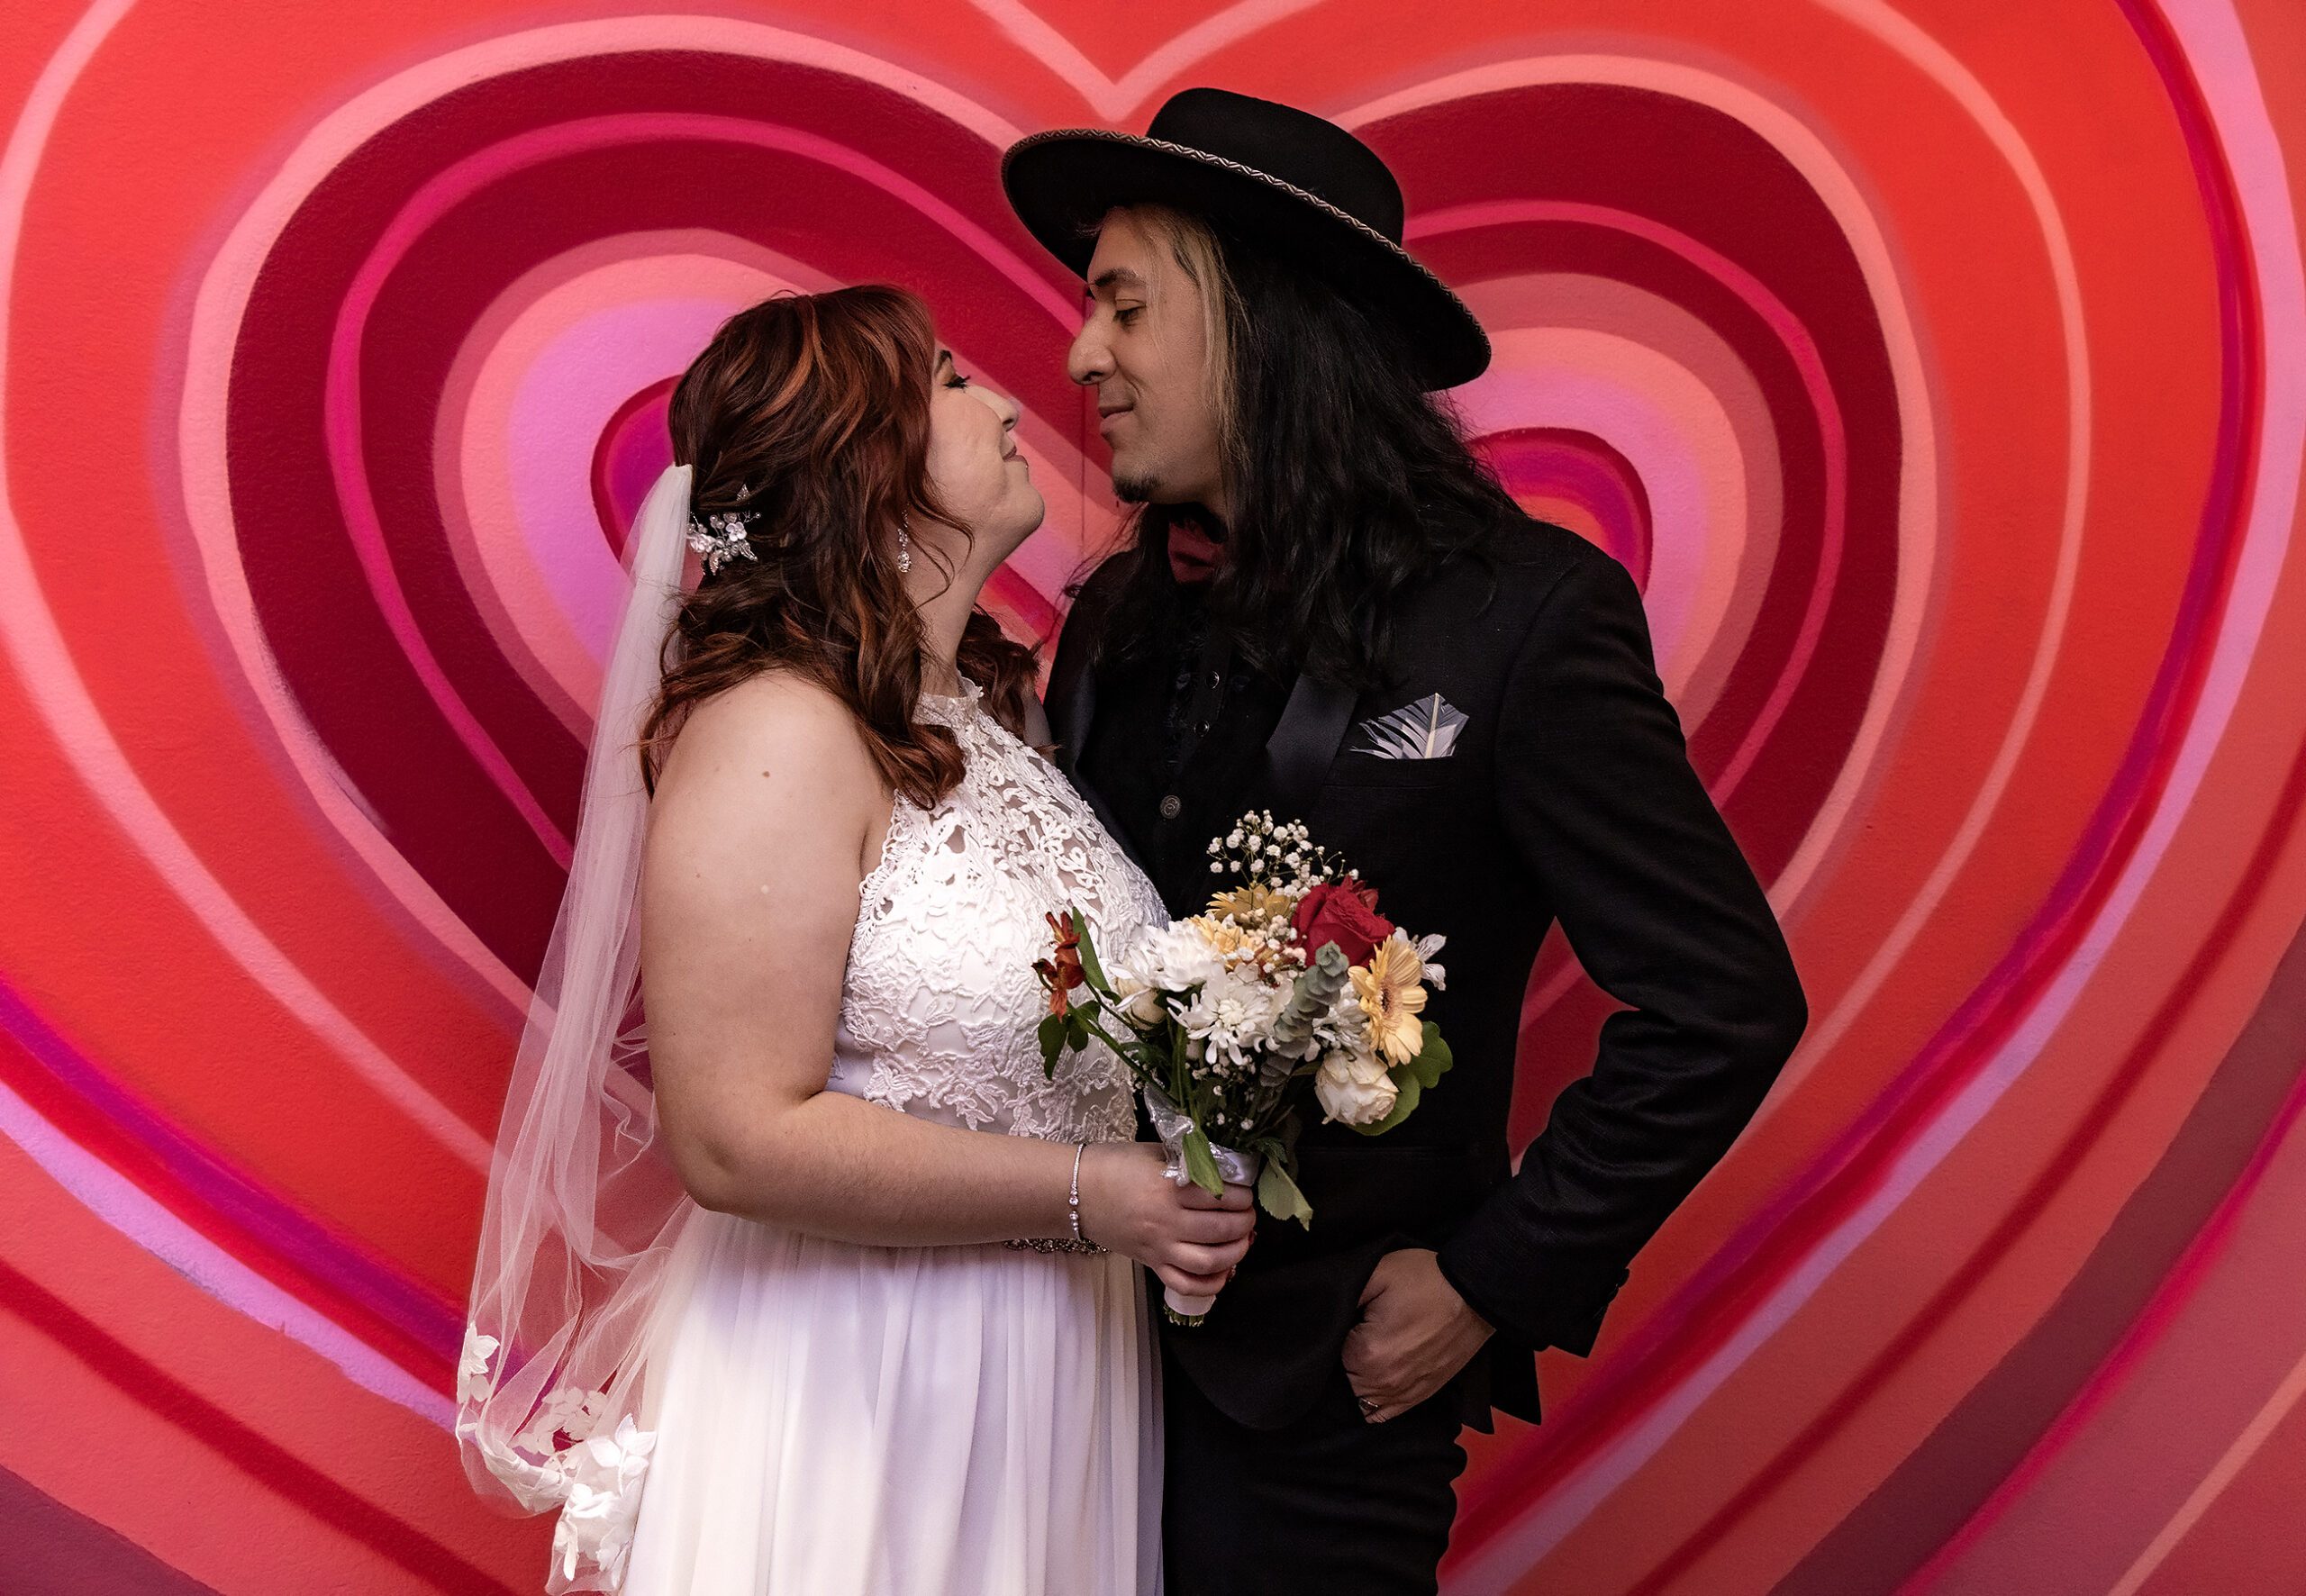 A bride and groom share an affectionate moment in front of a heart-patterned background at one of the wedding chapels in Las Vegas.